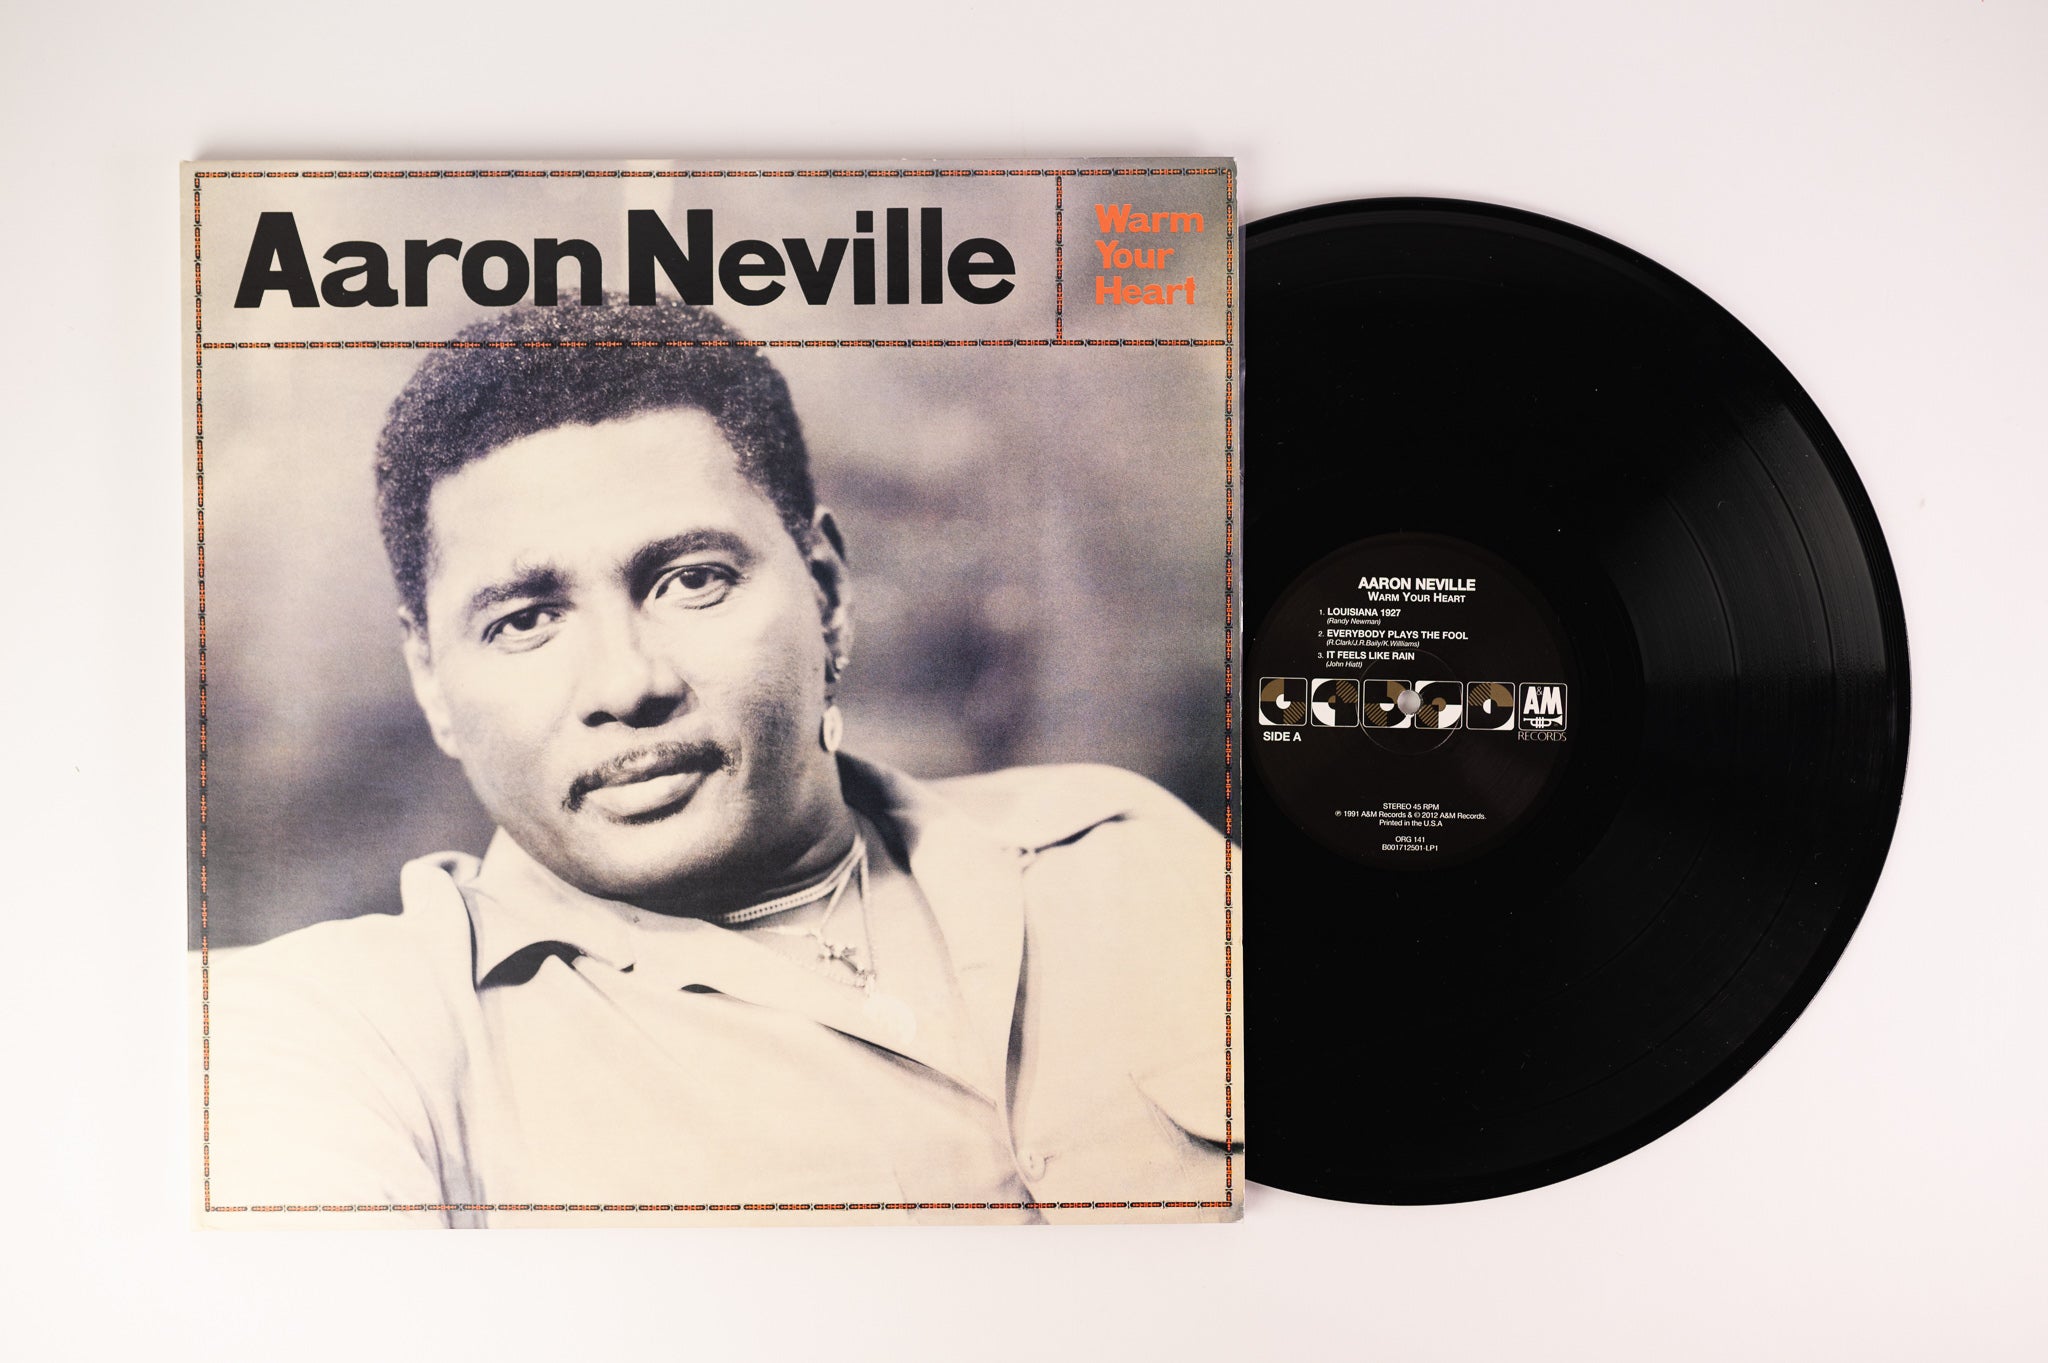 Aaron Neville - Warm Your Heart on Original Recordings Group 180 Gram Ltd Numbered Reissue